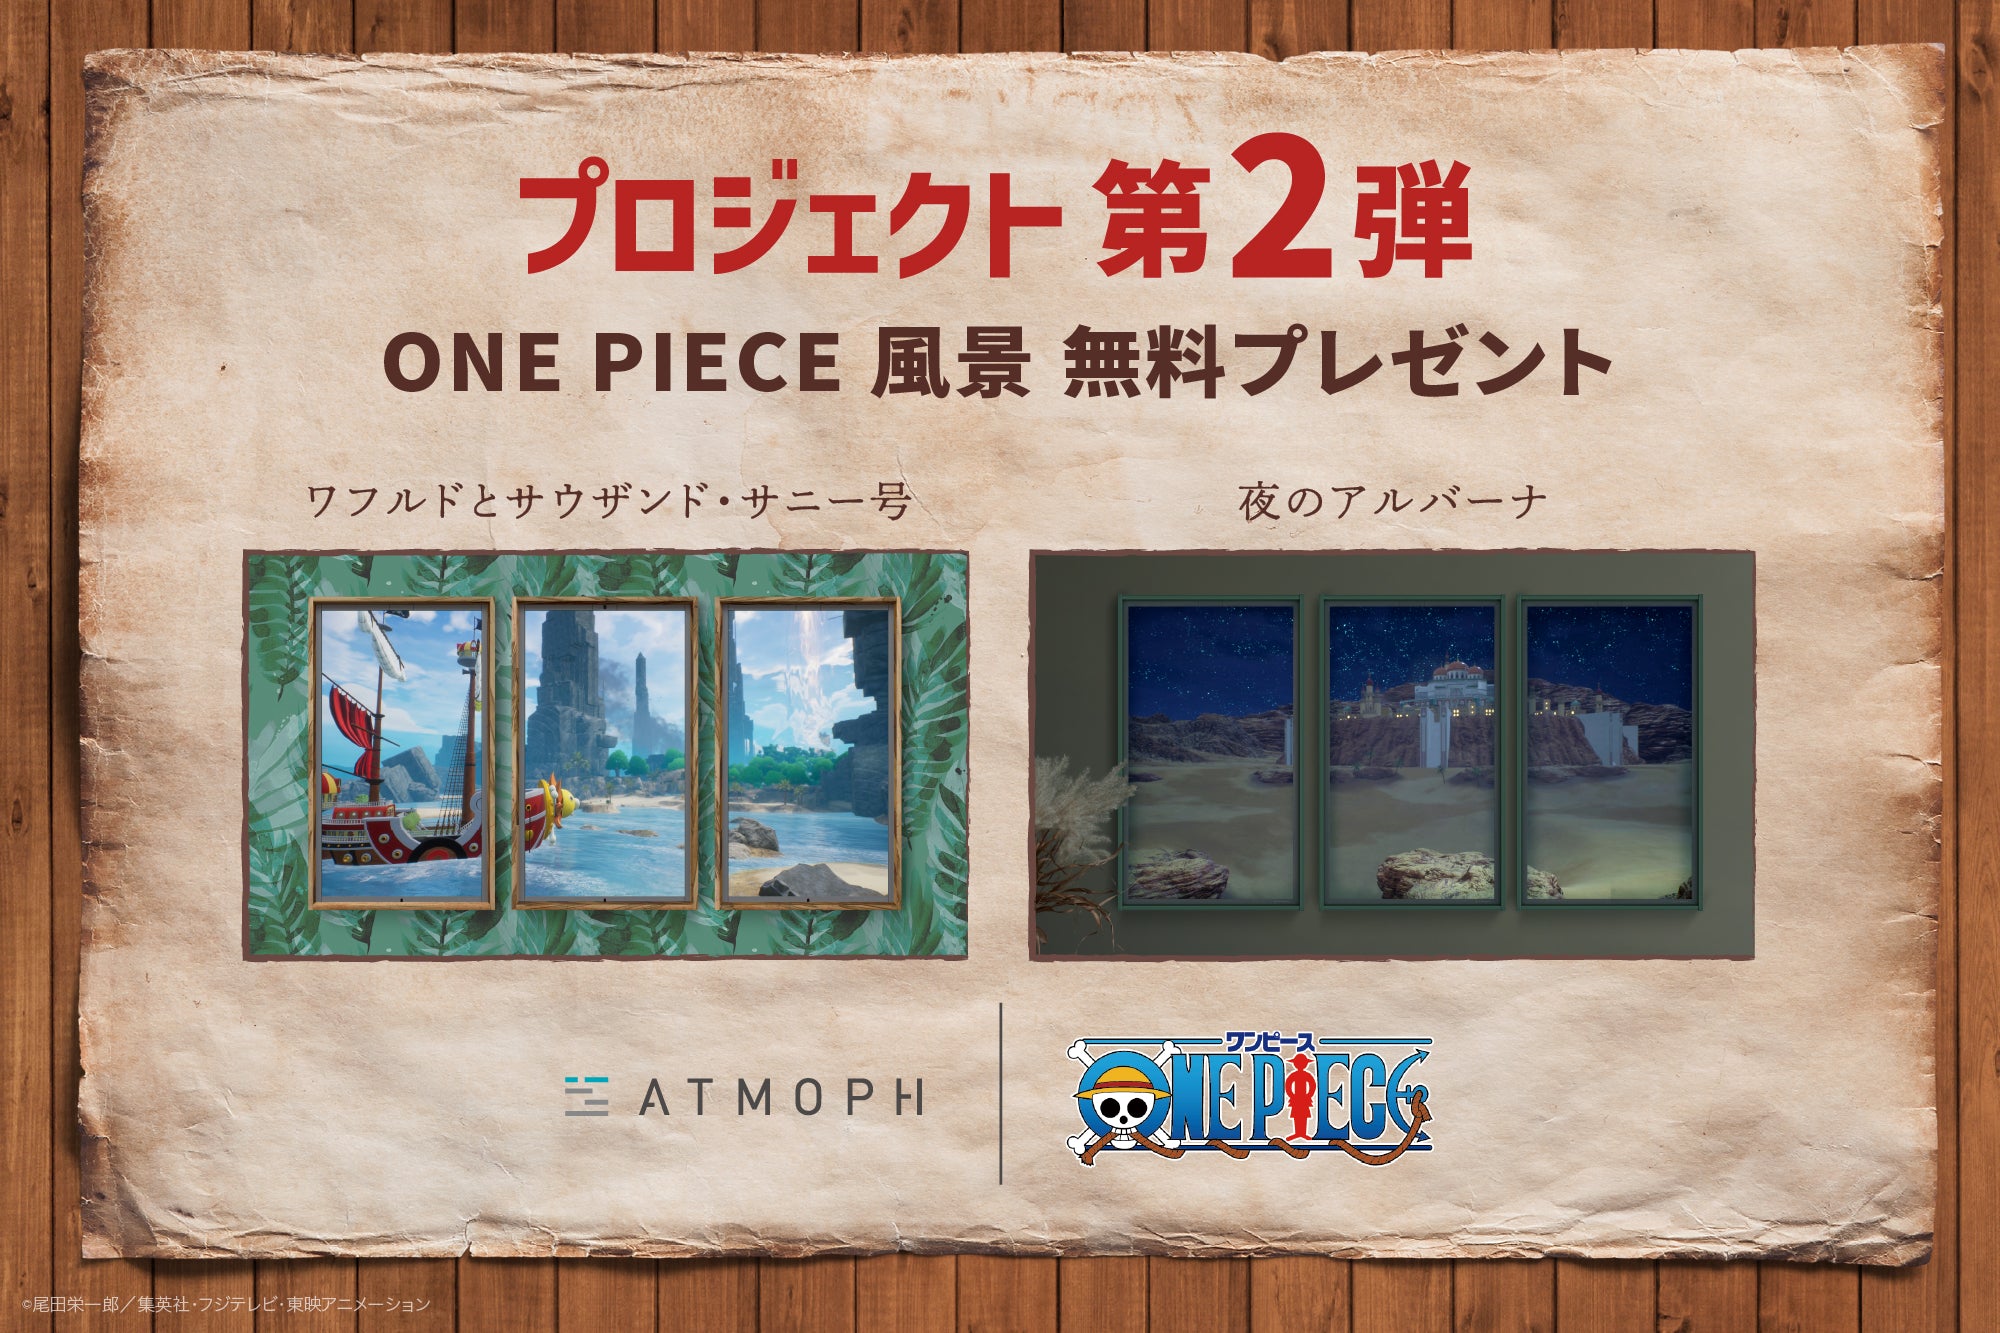 ONE PIECE」コラボ第2弾！風景2本を無料プレゼント。「ONE PIECE DAY'23」にも初出展 – Atmoph Store